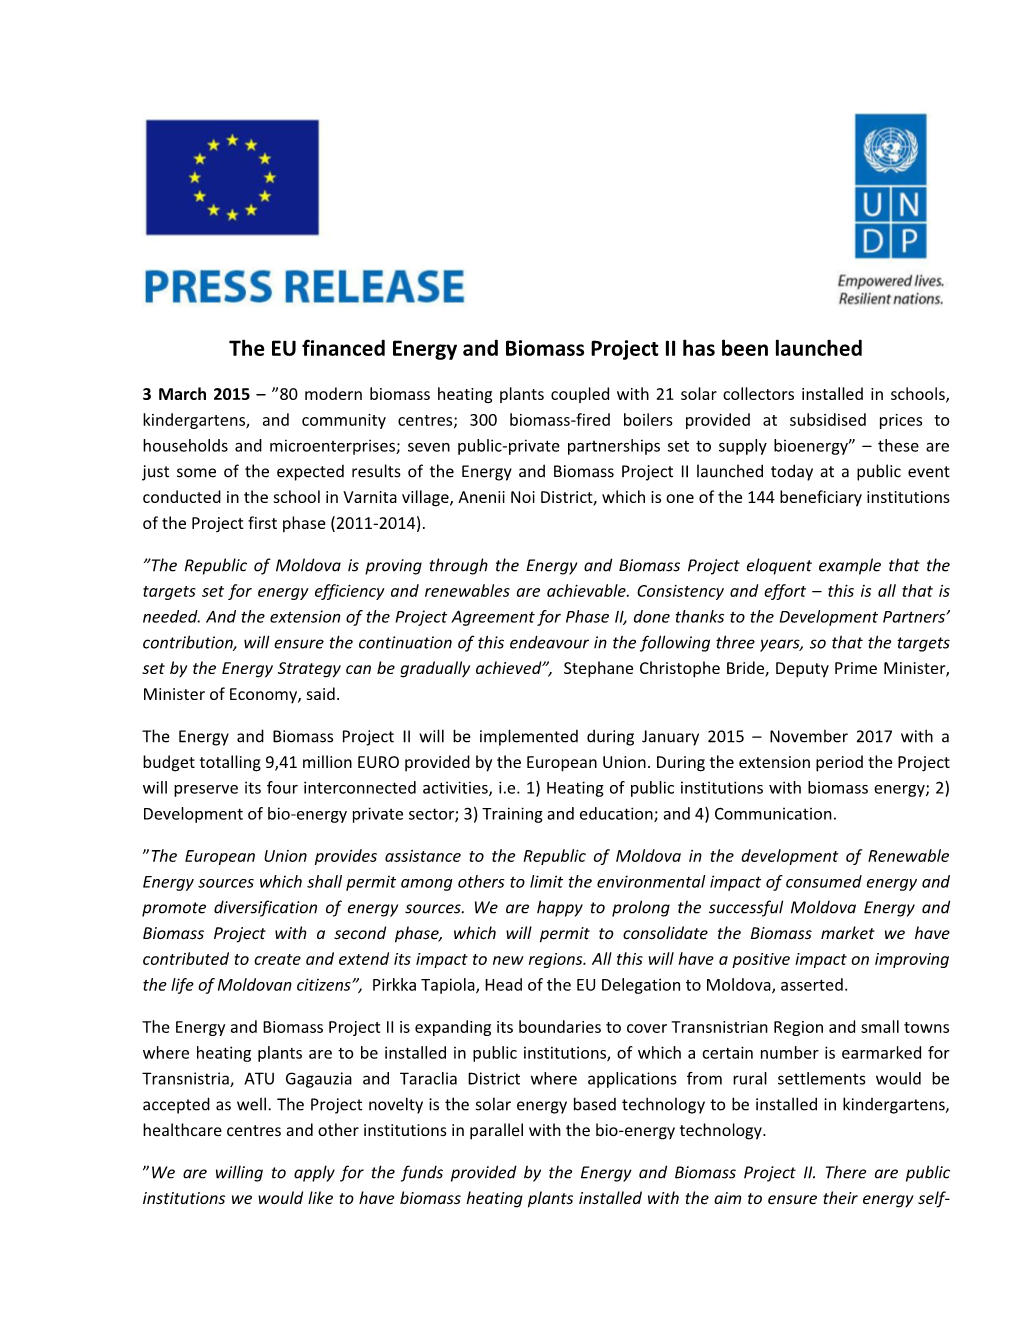 The EU Financed Energy and Biomass Project II Has Been Launched